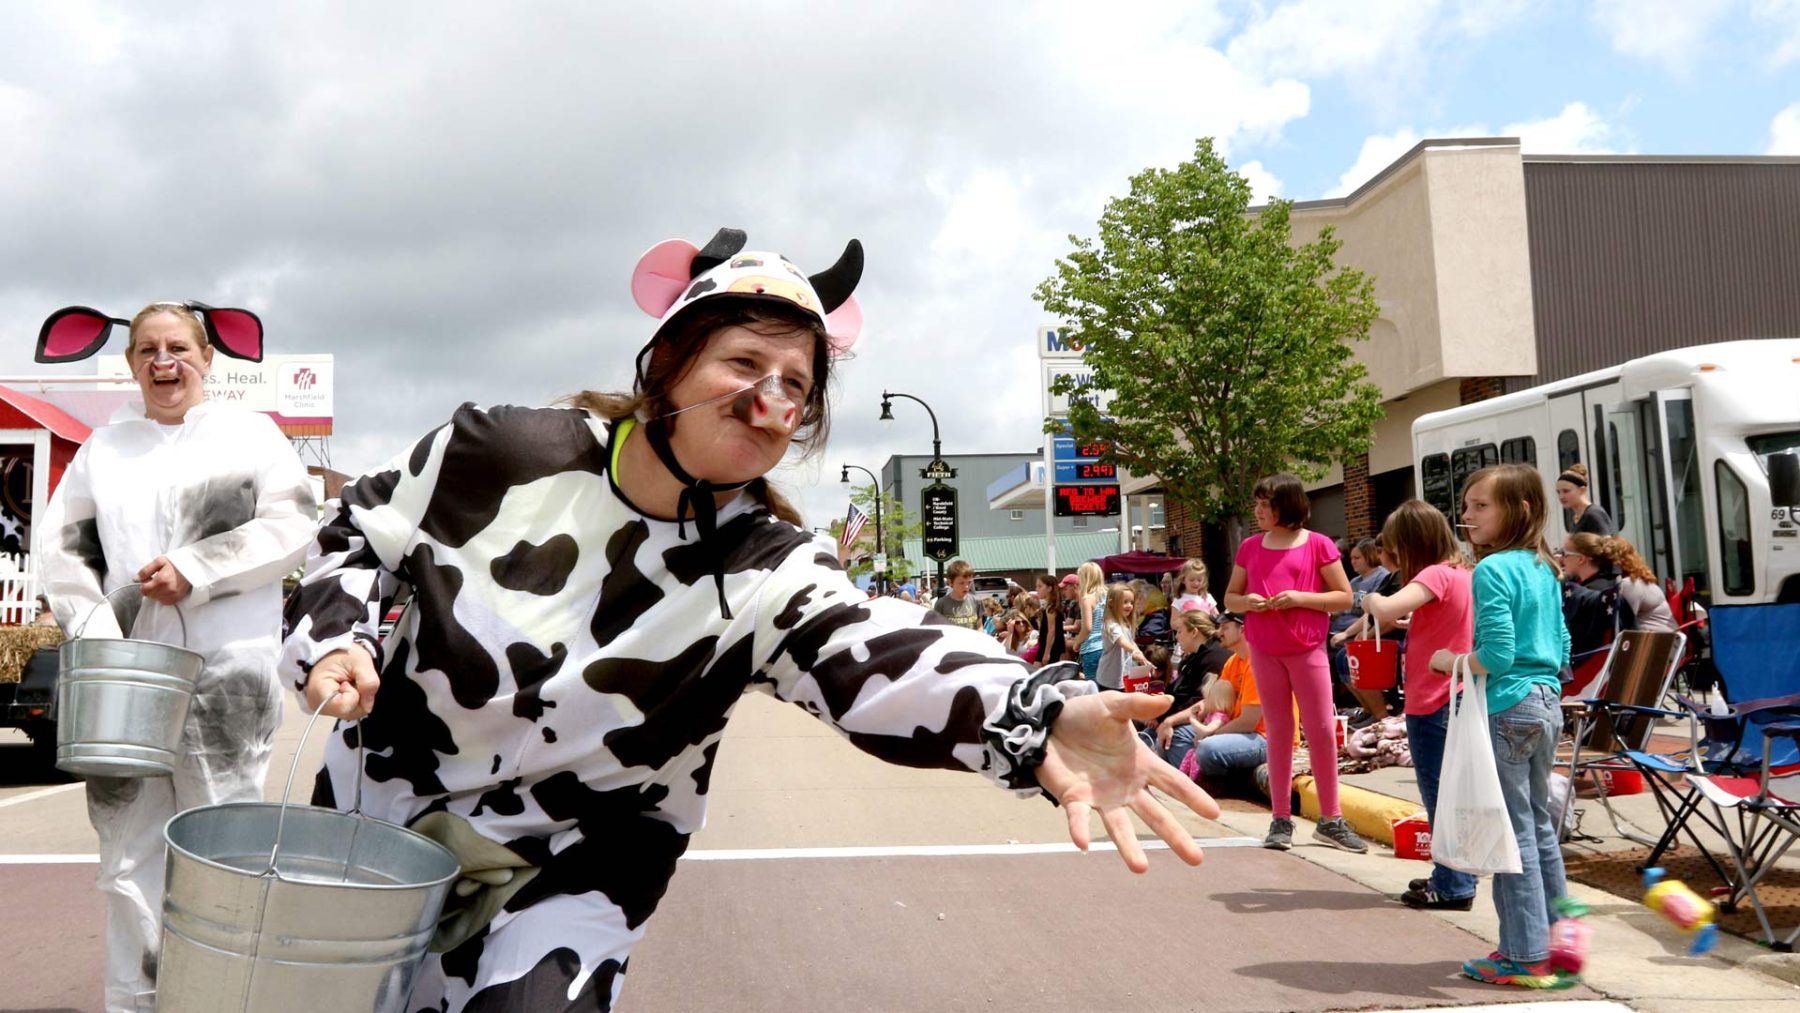 Article: The Big Six | Person dressed as cow throwing candy to kids during a parade